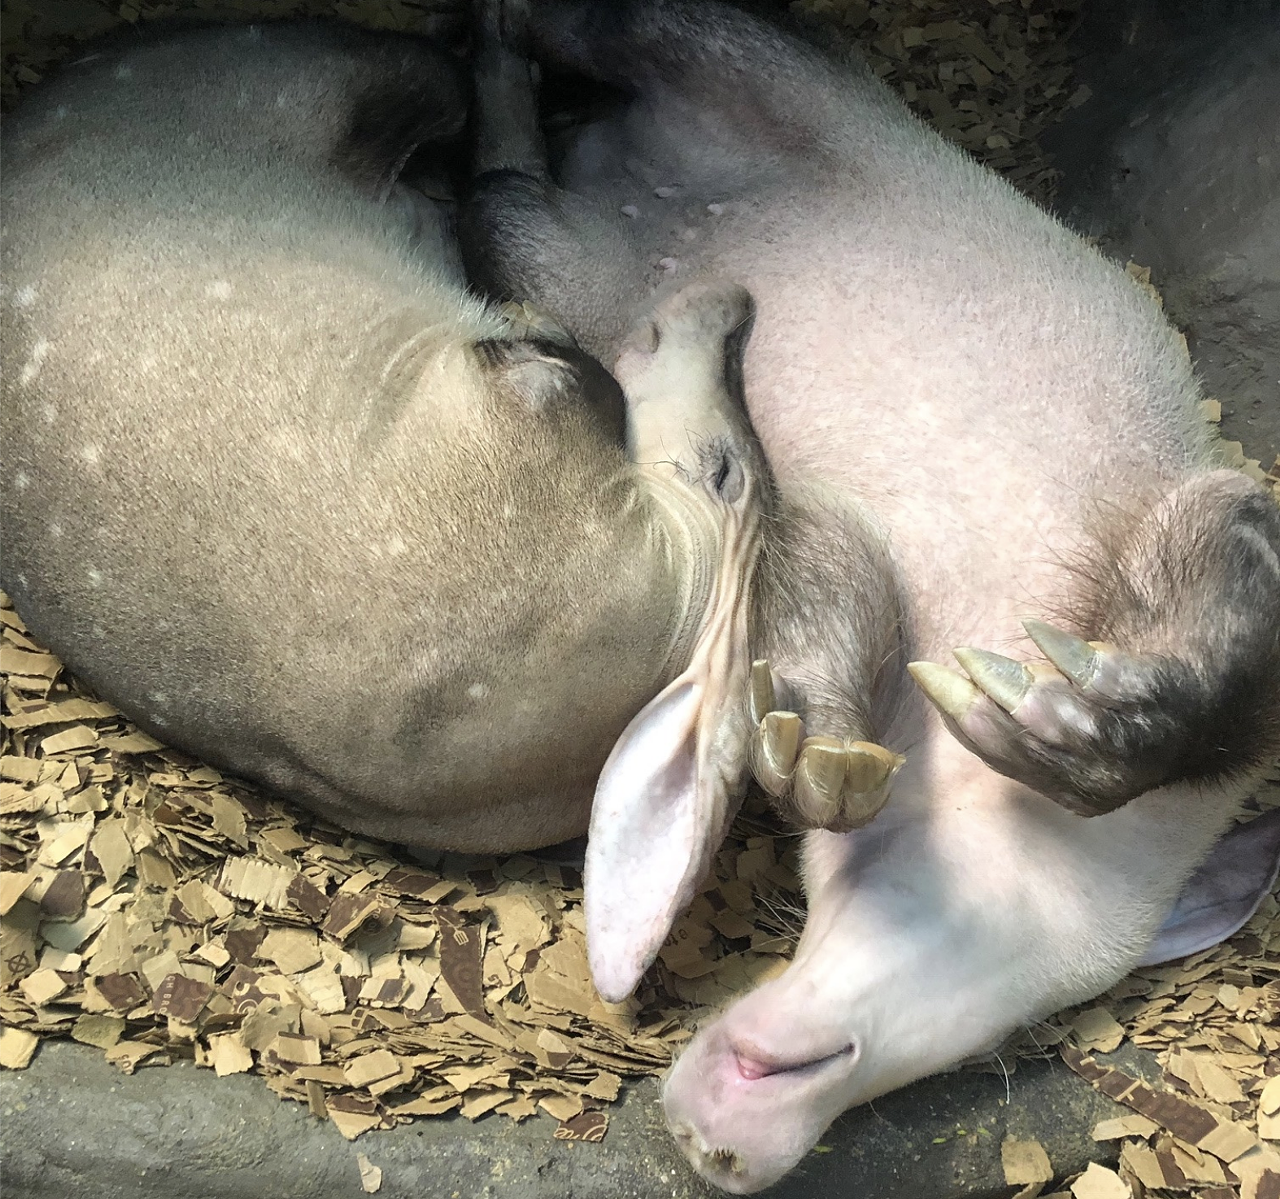 Sometimes it's exhausting being an aardvark.